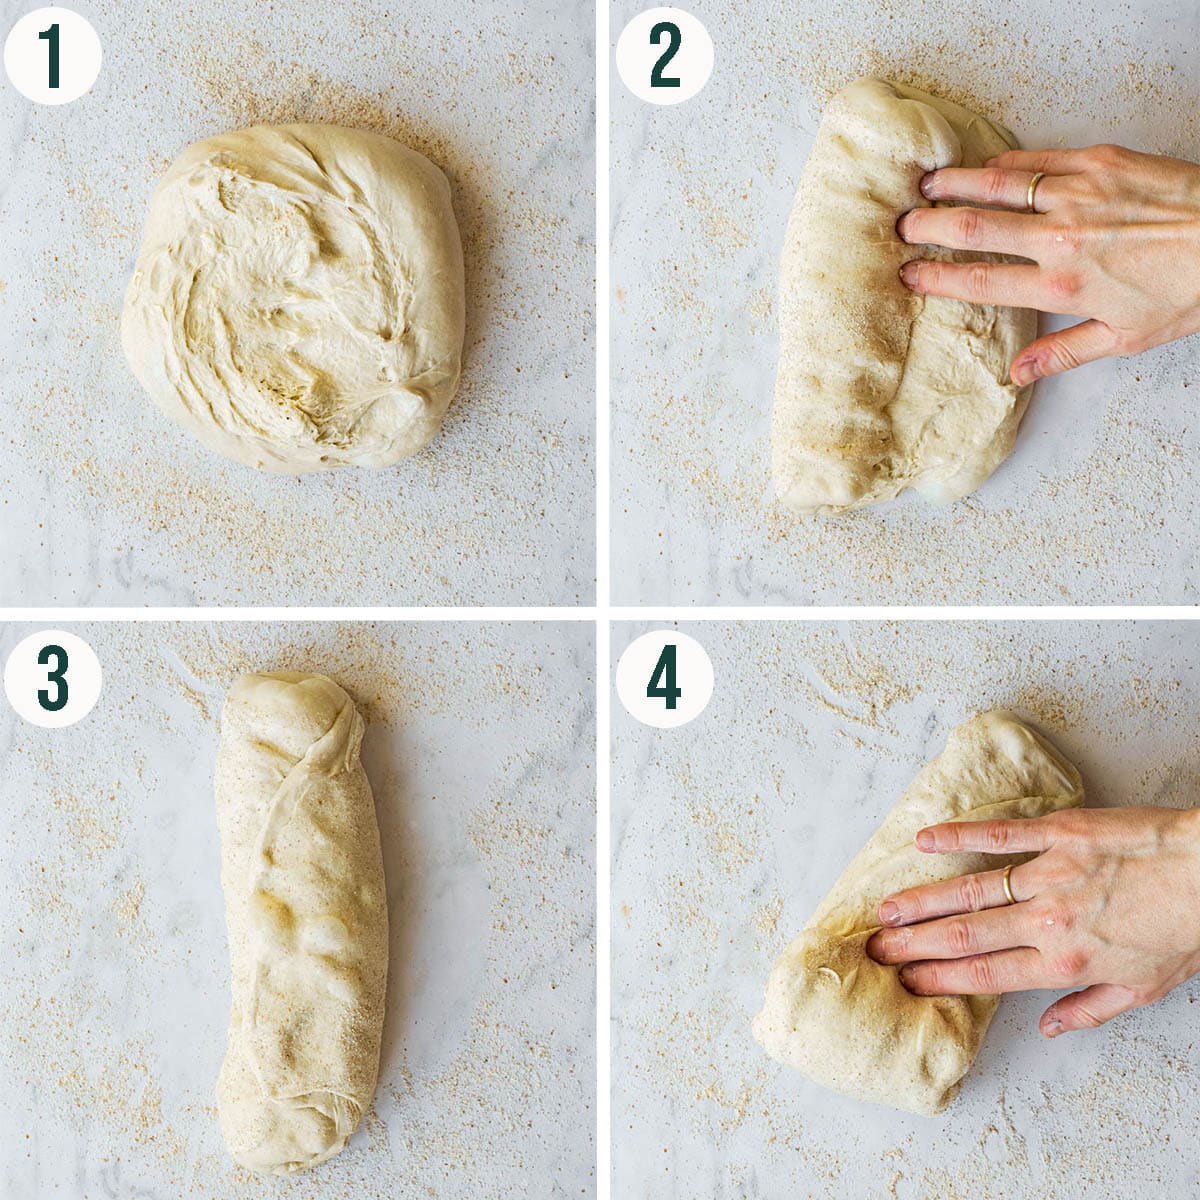 Shaping dough steps 1 to 4, rolling it up into a spiral.